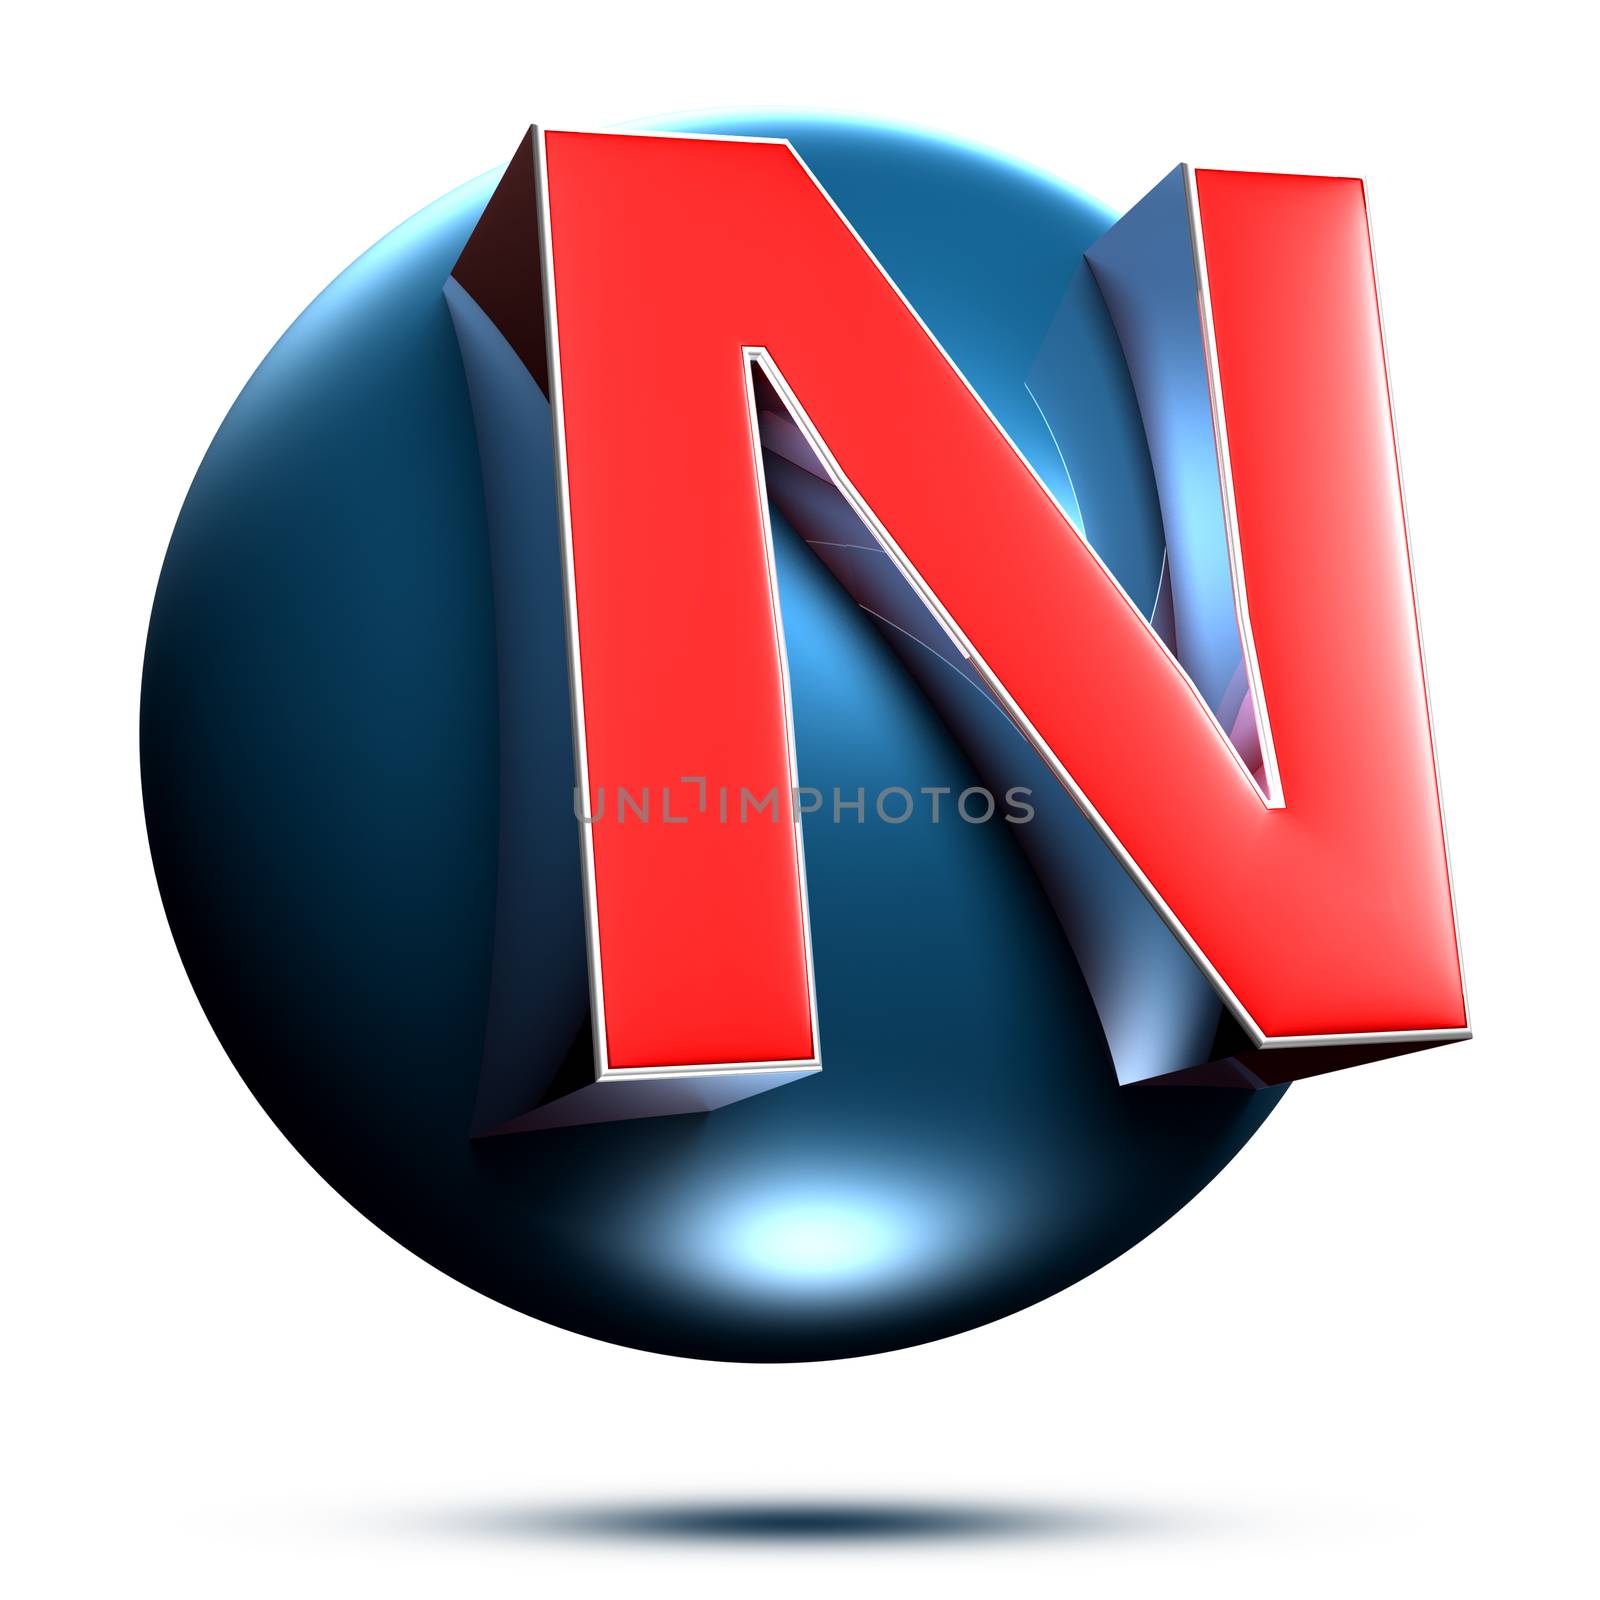 N logo isolated on white background illustration 3D rendering with clipping path.